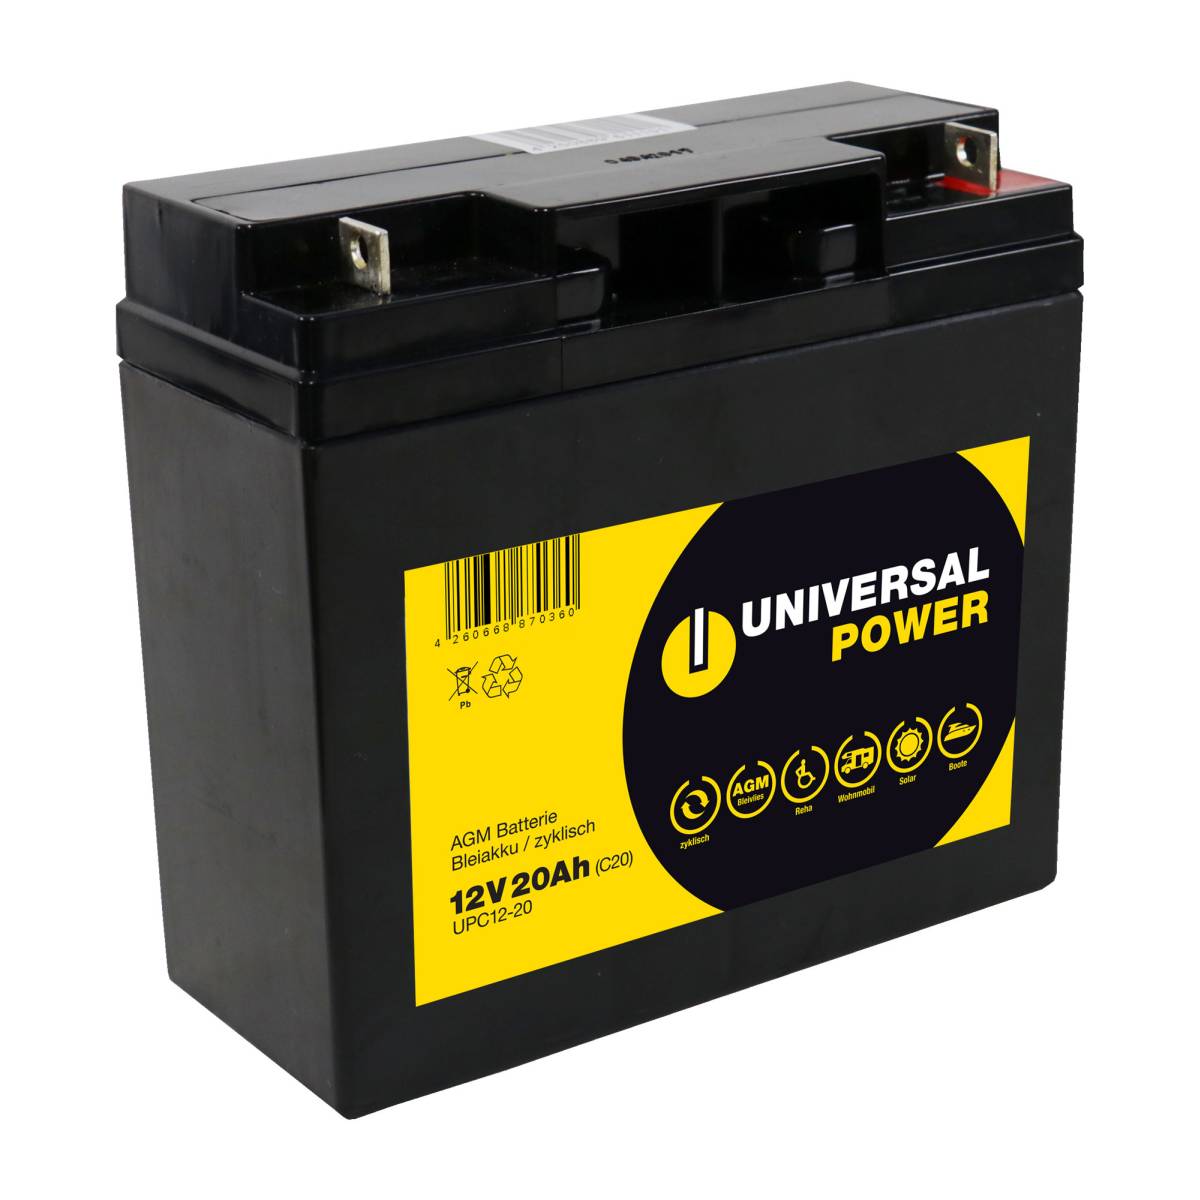 Universal Power AGM UPC12-20 12V 20Ah (C20) AGM Batterie zyklenfest wartungsfrei 